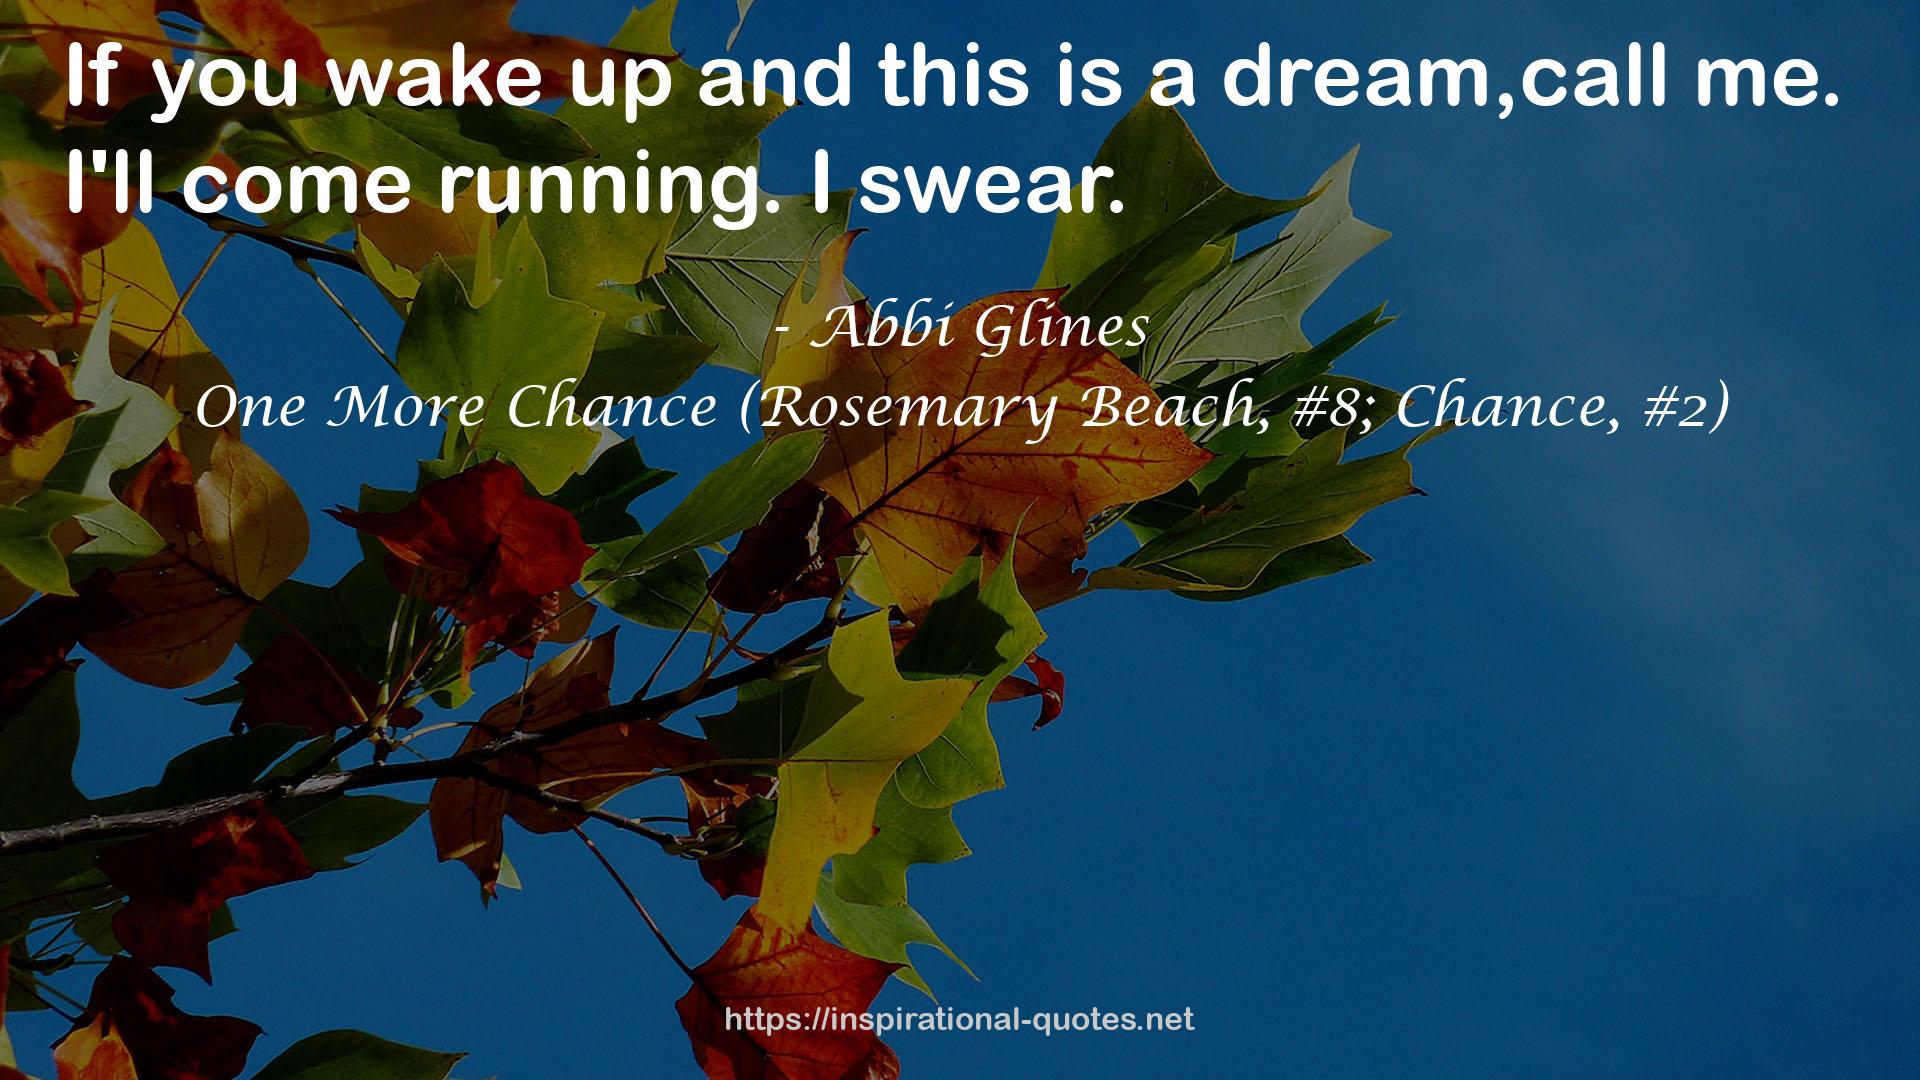 One More Chance (Rosemary Beach, #8; Chance, #2) QUOTES